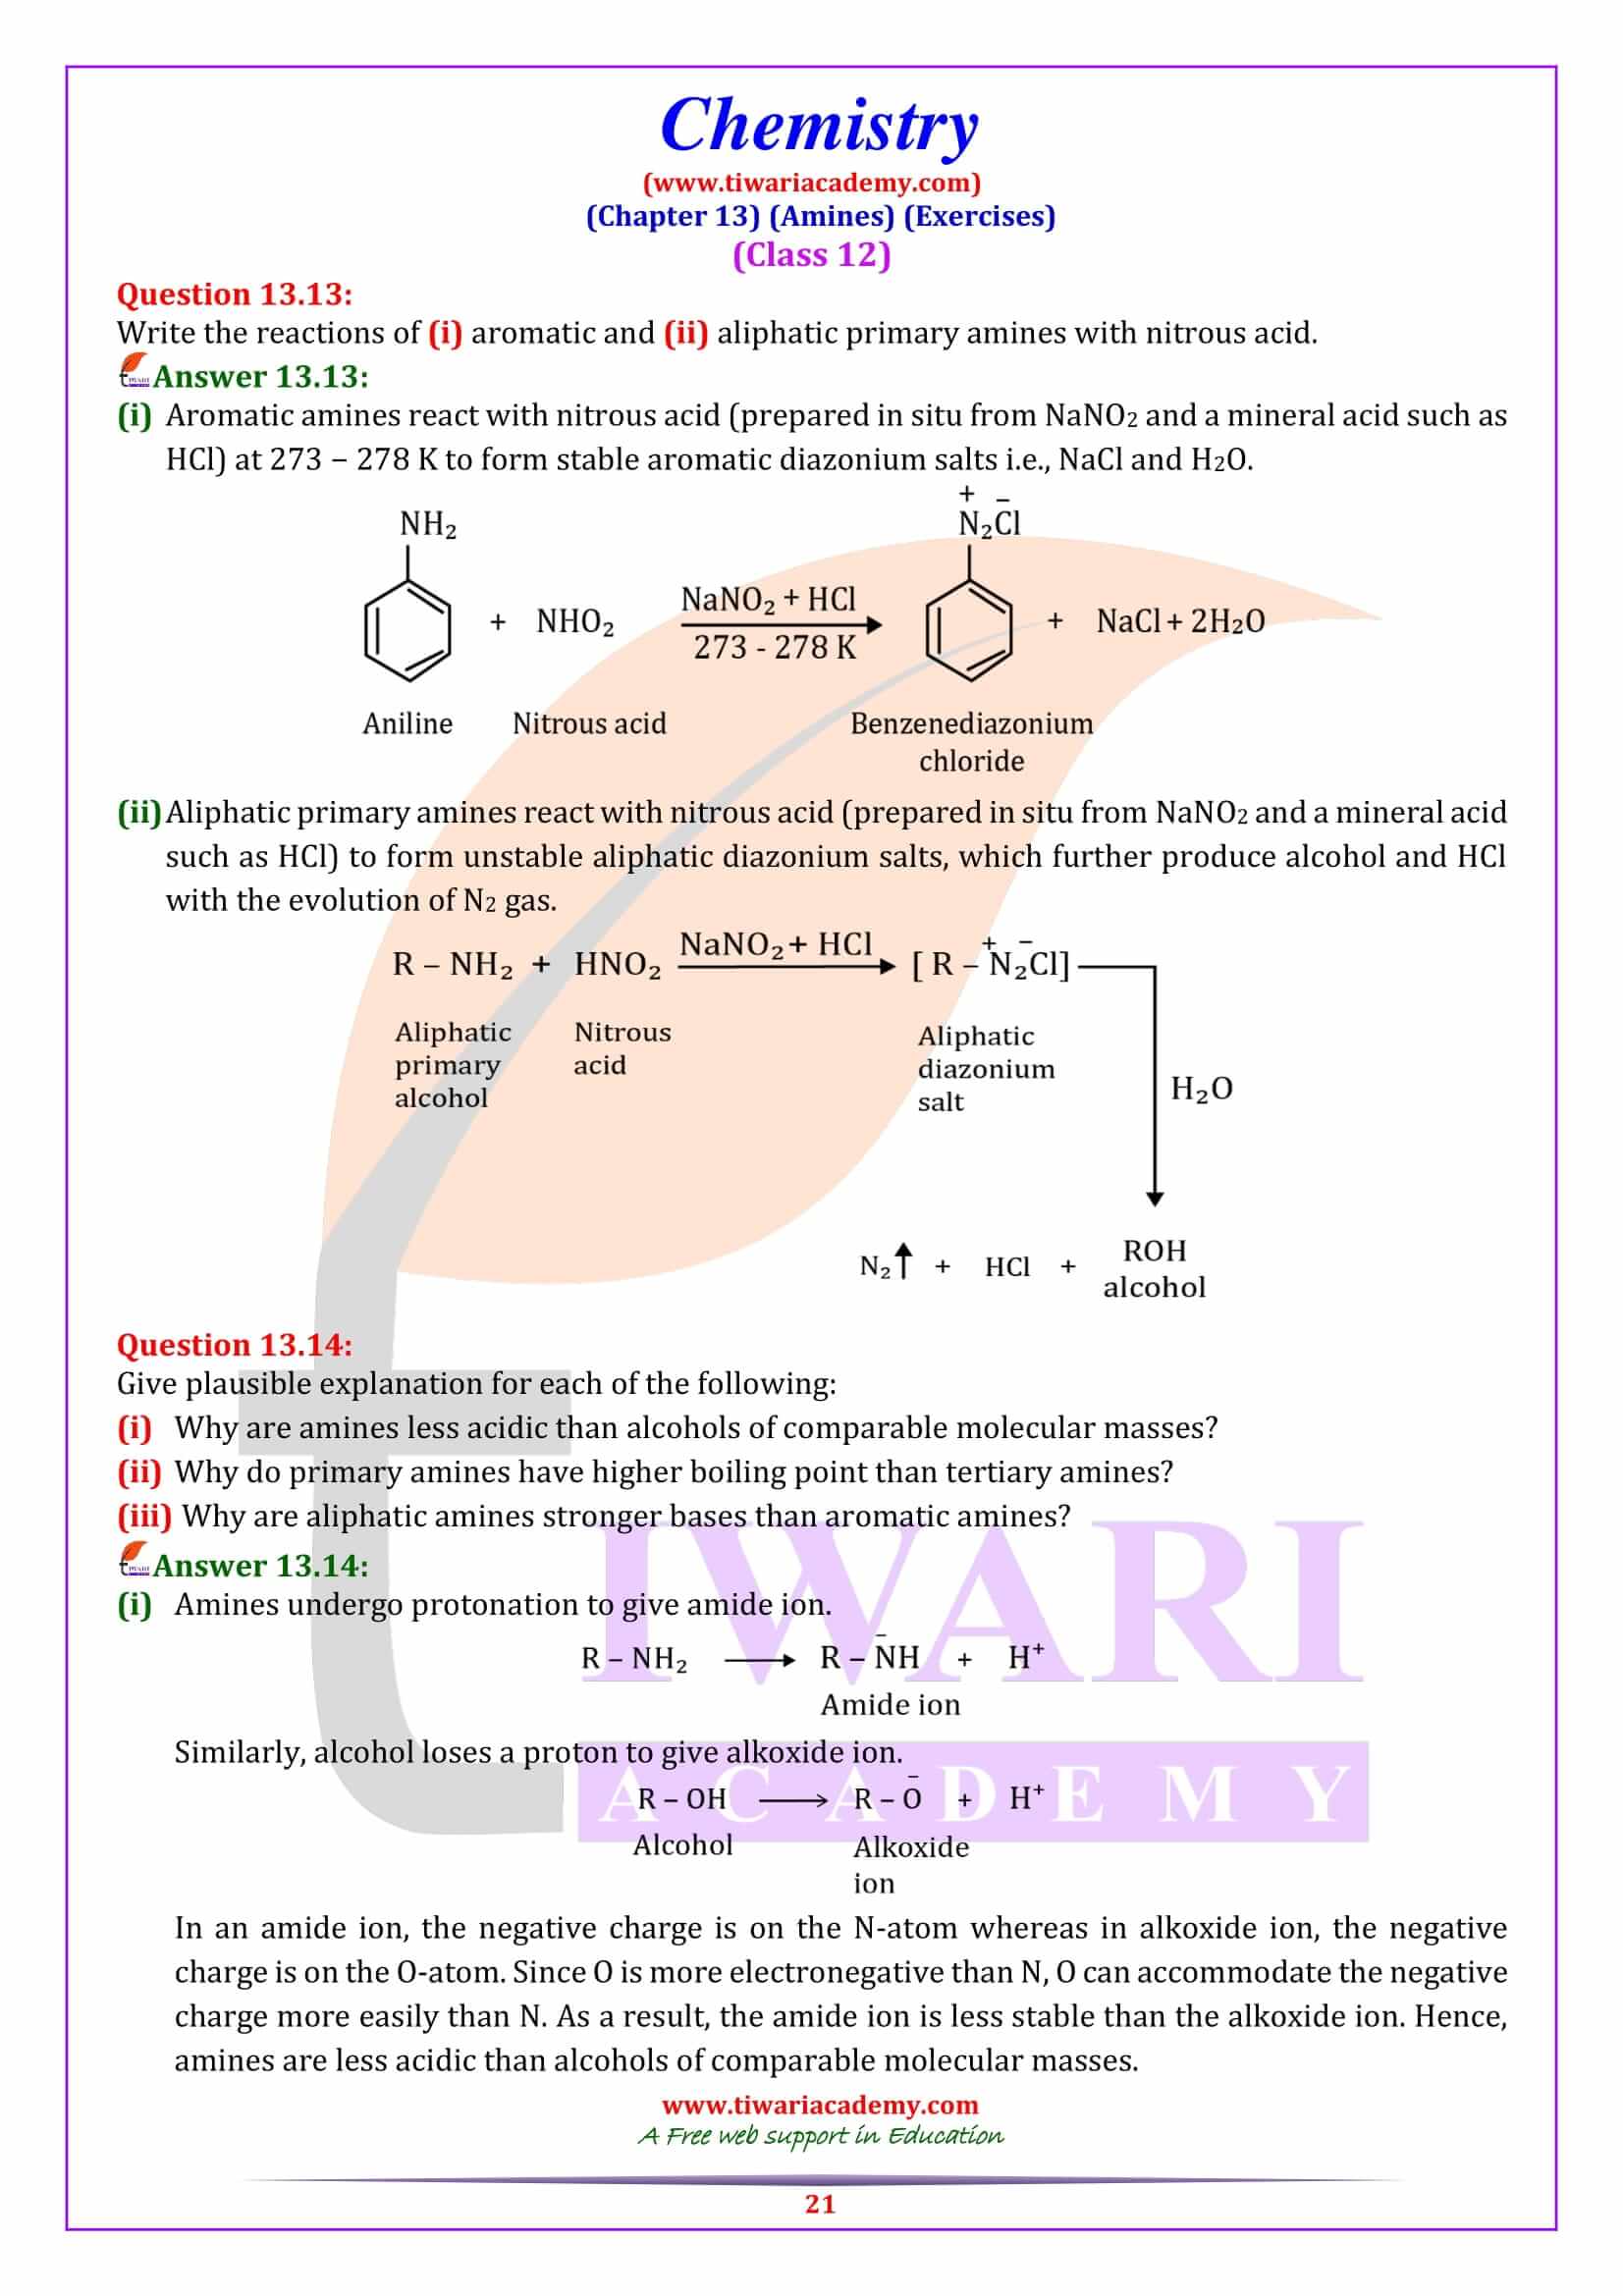 Class 12 Chemistry Chapter 13 answers textbook